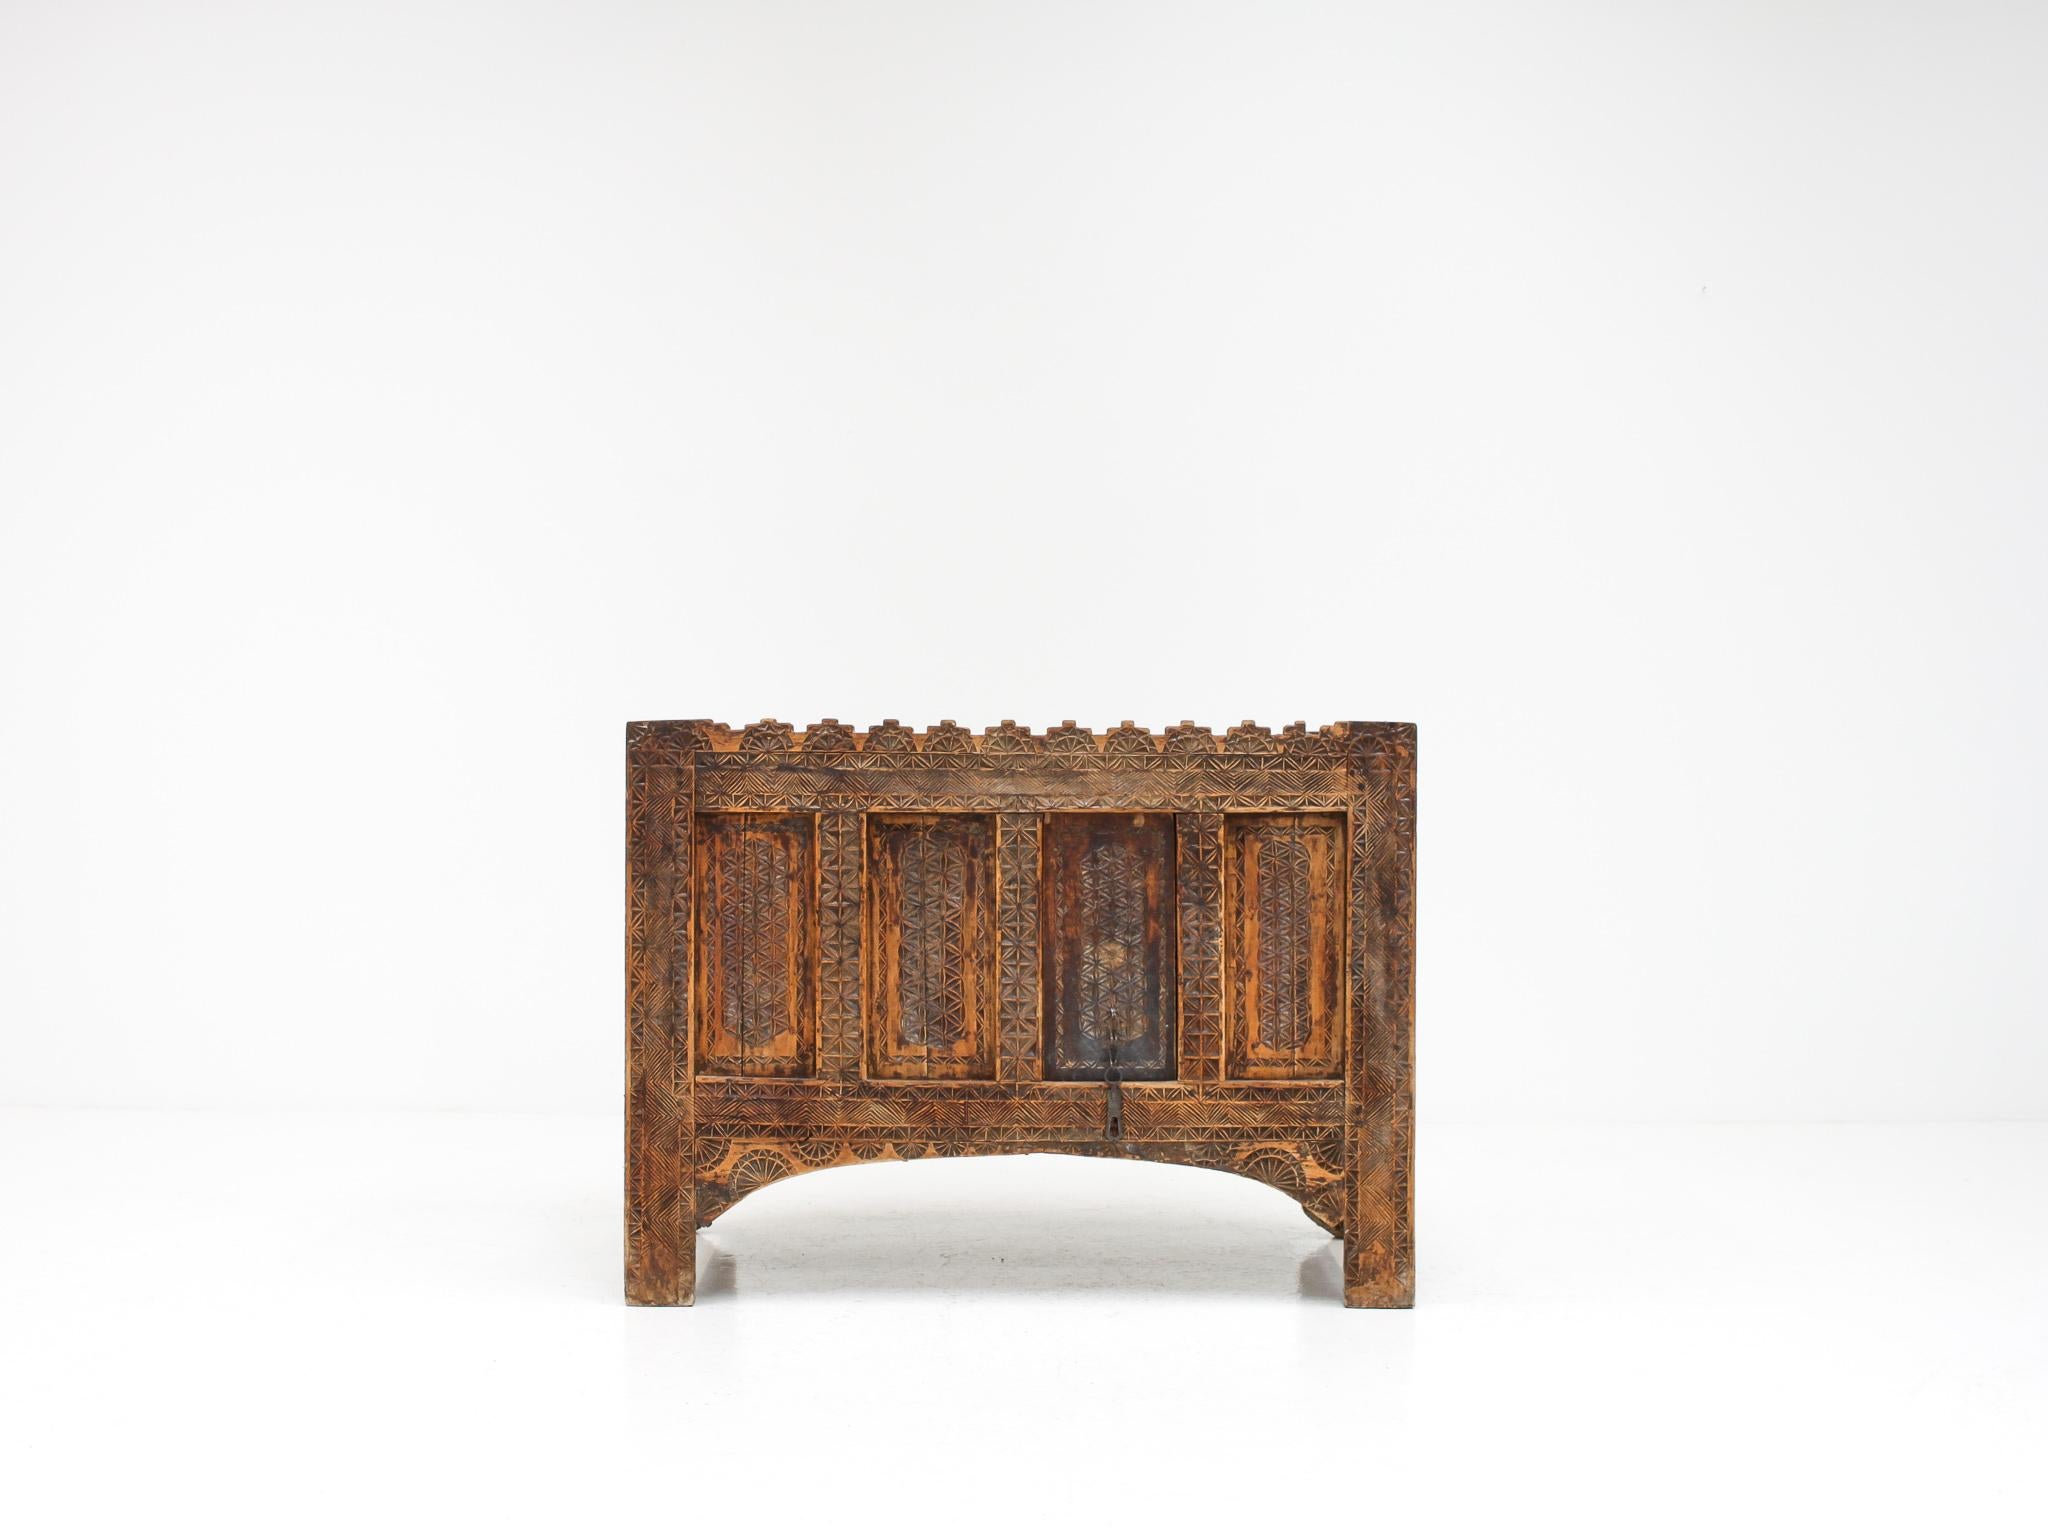 An amazing antique c19th century chest originating from the Turkman people of Afghanistan, Central Asia.

Beautifully carved with a great naive aesthetic. The piece is pegged rather than having any metal fixings.

Condition: In original condition.